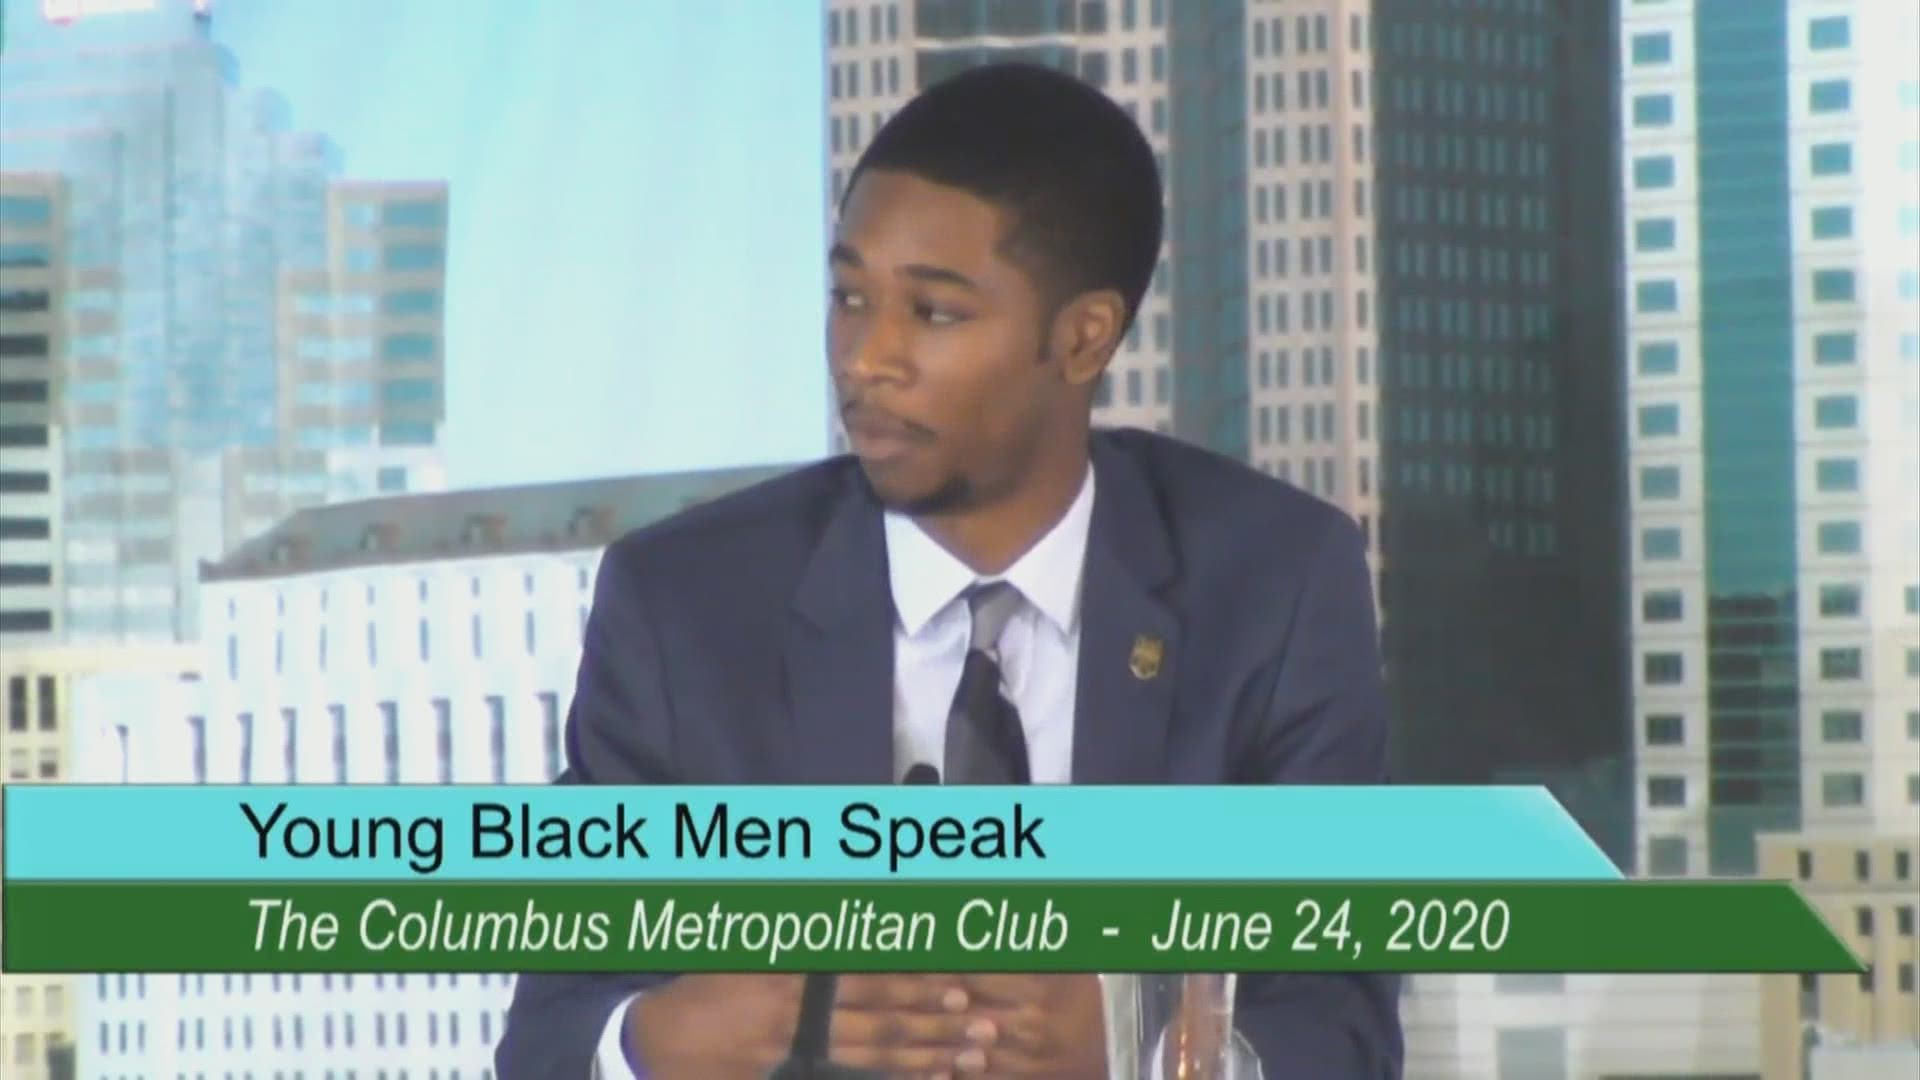 Two college students aim to change the perception of black men in America